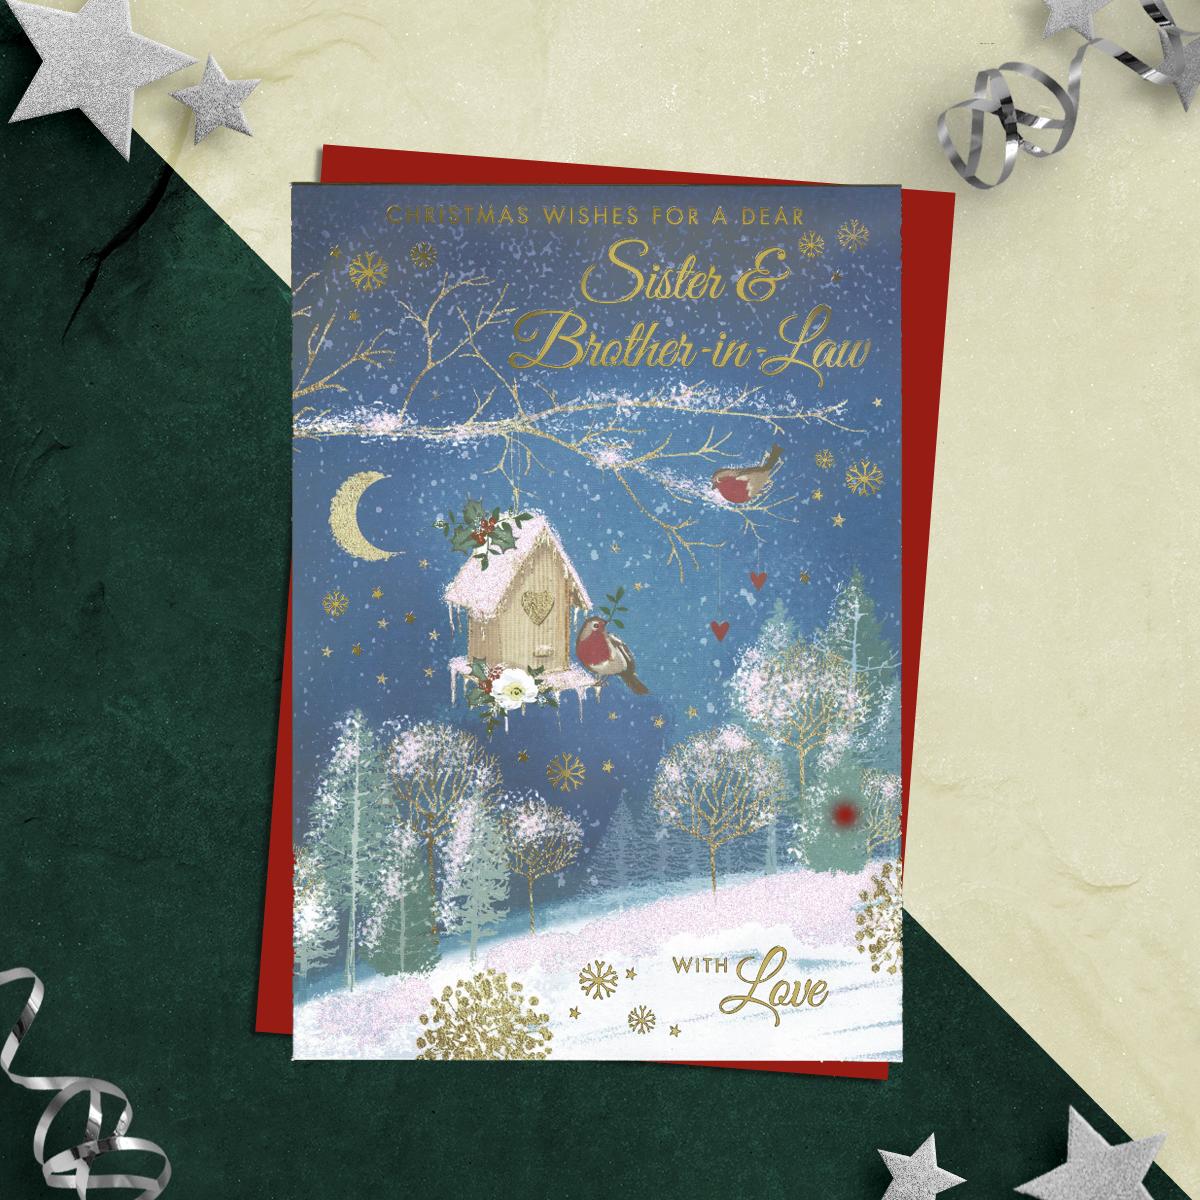 Christmas Wishes For A Dear Sister and Brother In Law With love Showing A Beautiful Snow Covered Bird House Hanging From A Tree With Robins. Finished with Gold Foil Lettering , Sparkle And Red Envelope